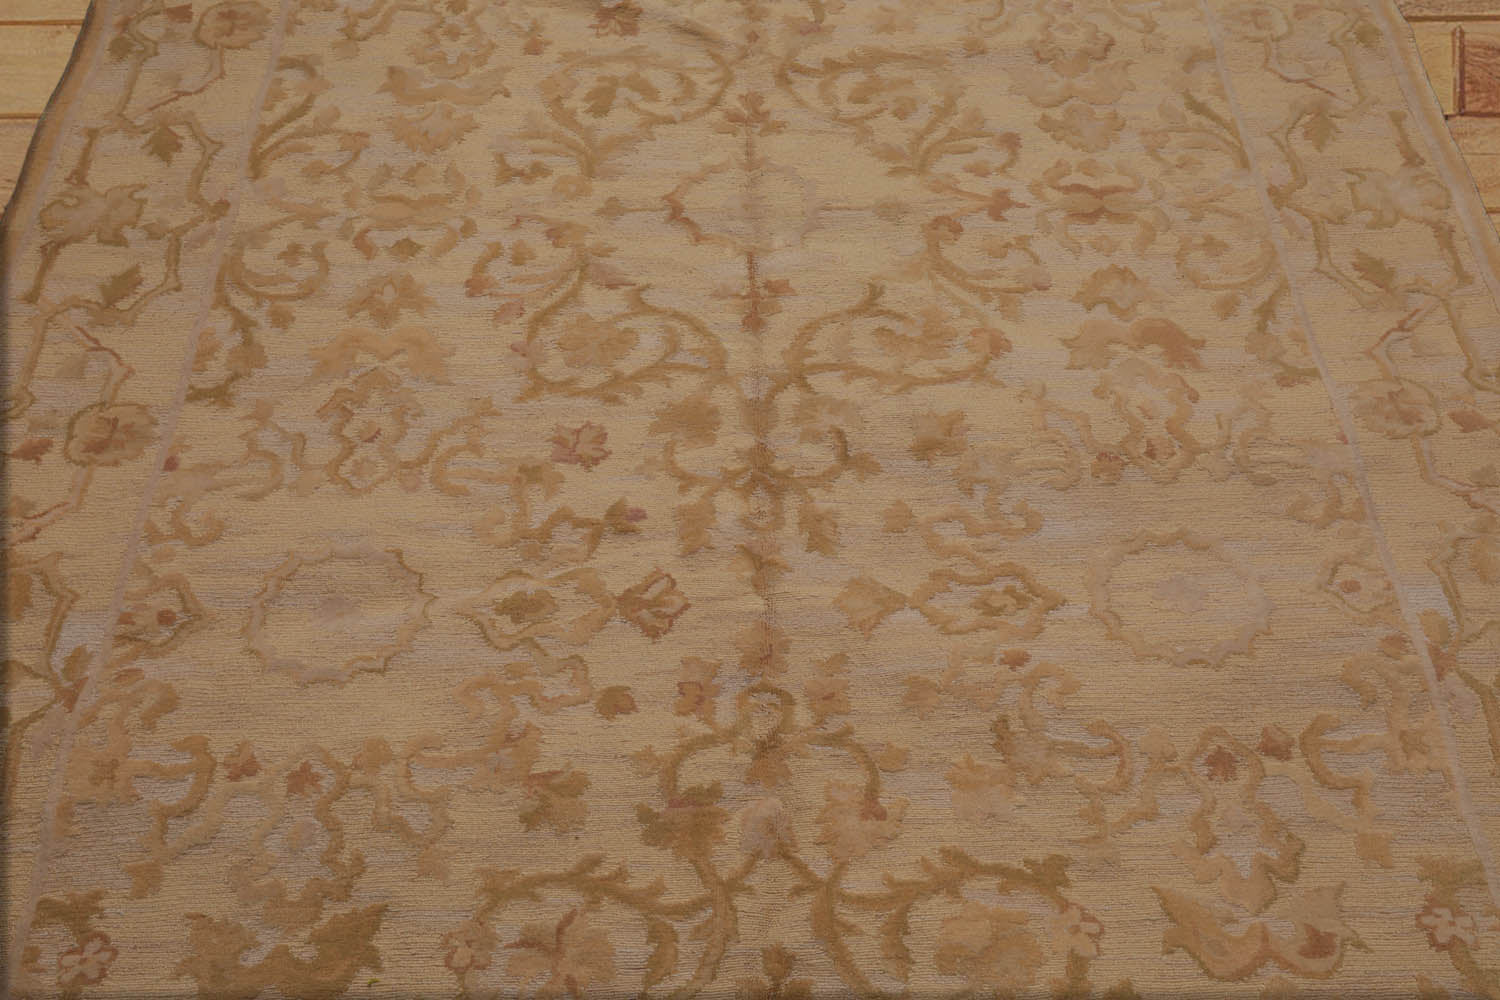 Sims 6x9 Hand Knotted French Aubusson Savonnerie 100% Wool Asmara Traditional Oriental Area Rug Beige, Tan Color